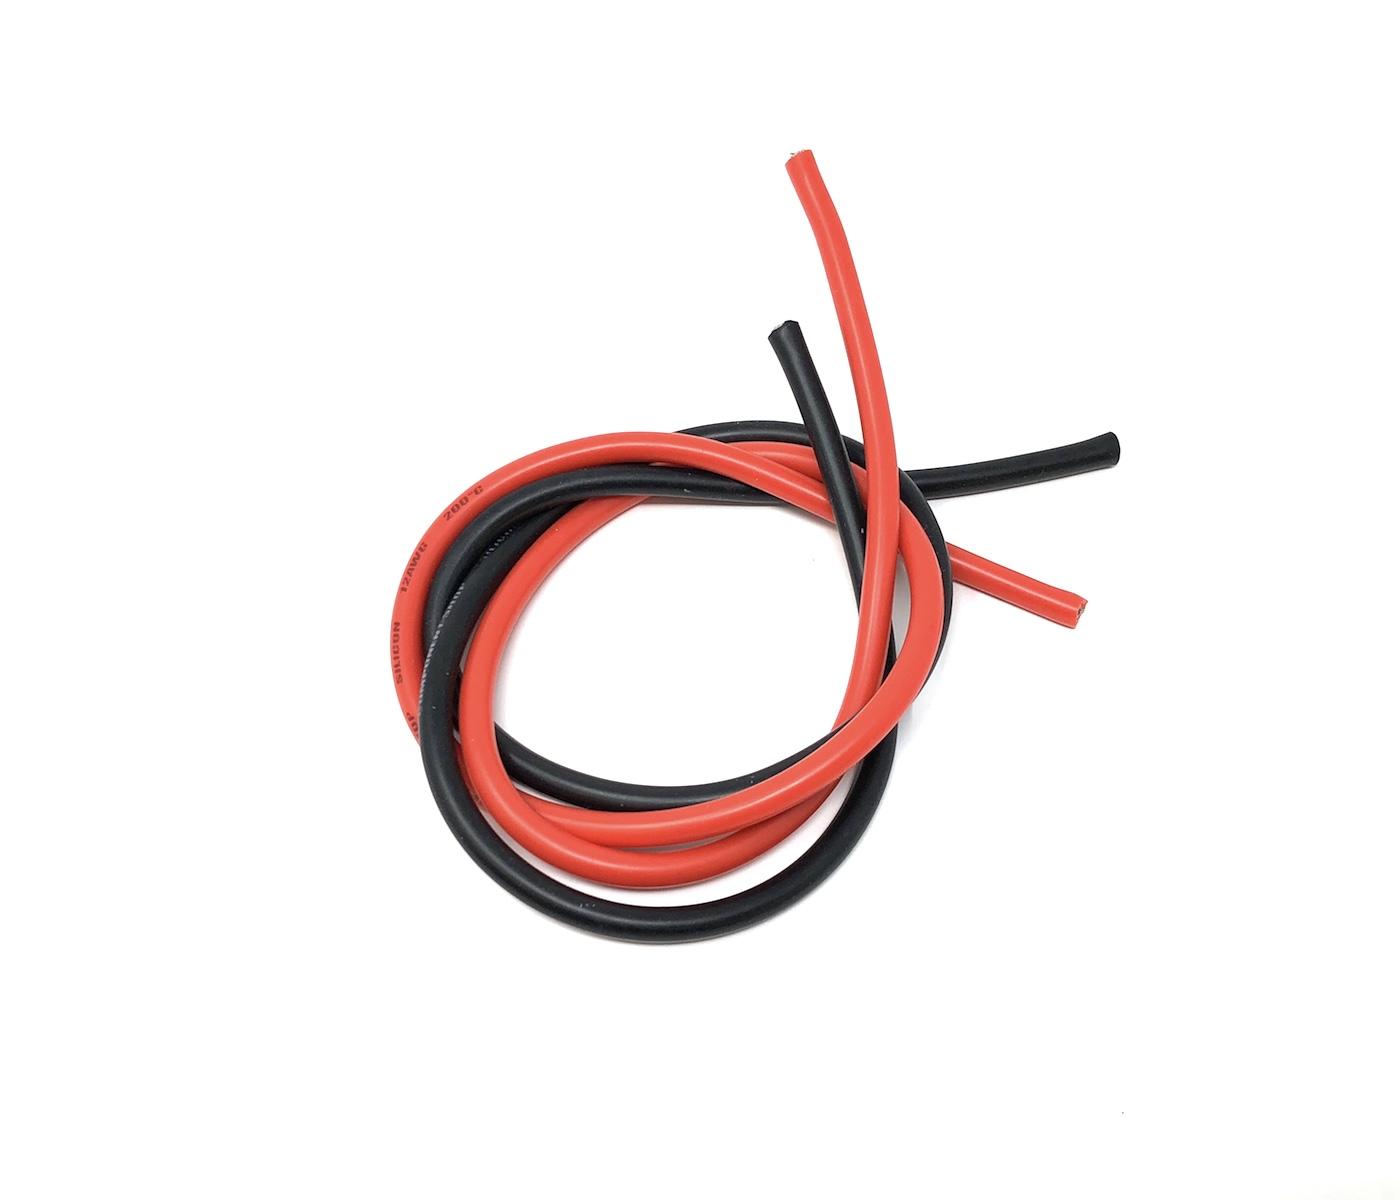 12awg Silicone Wire 0.5M Black and Red